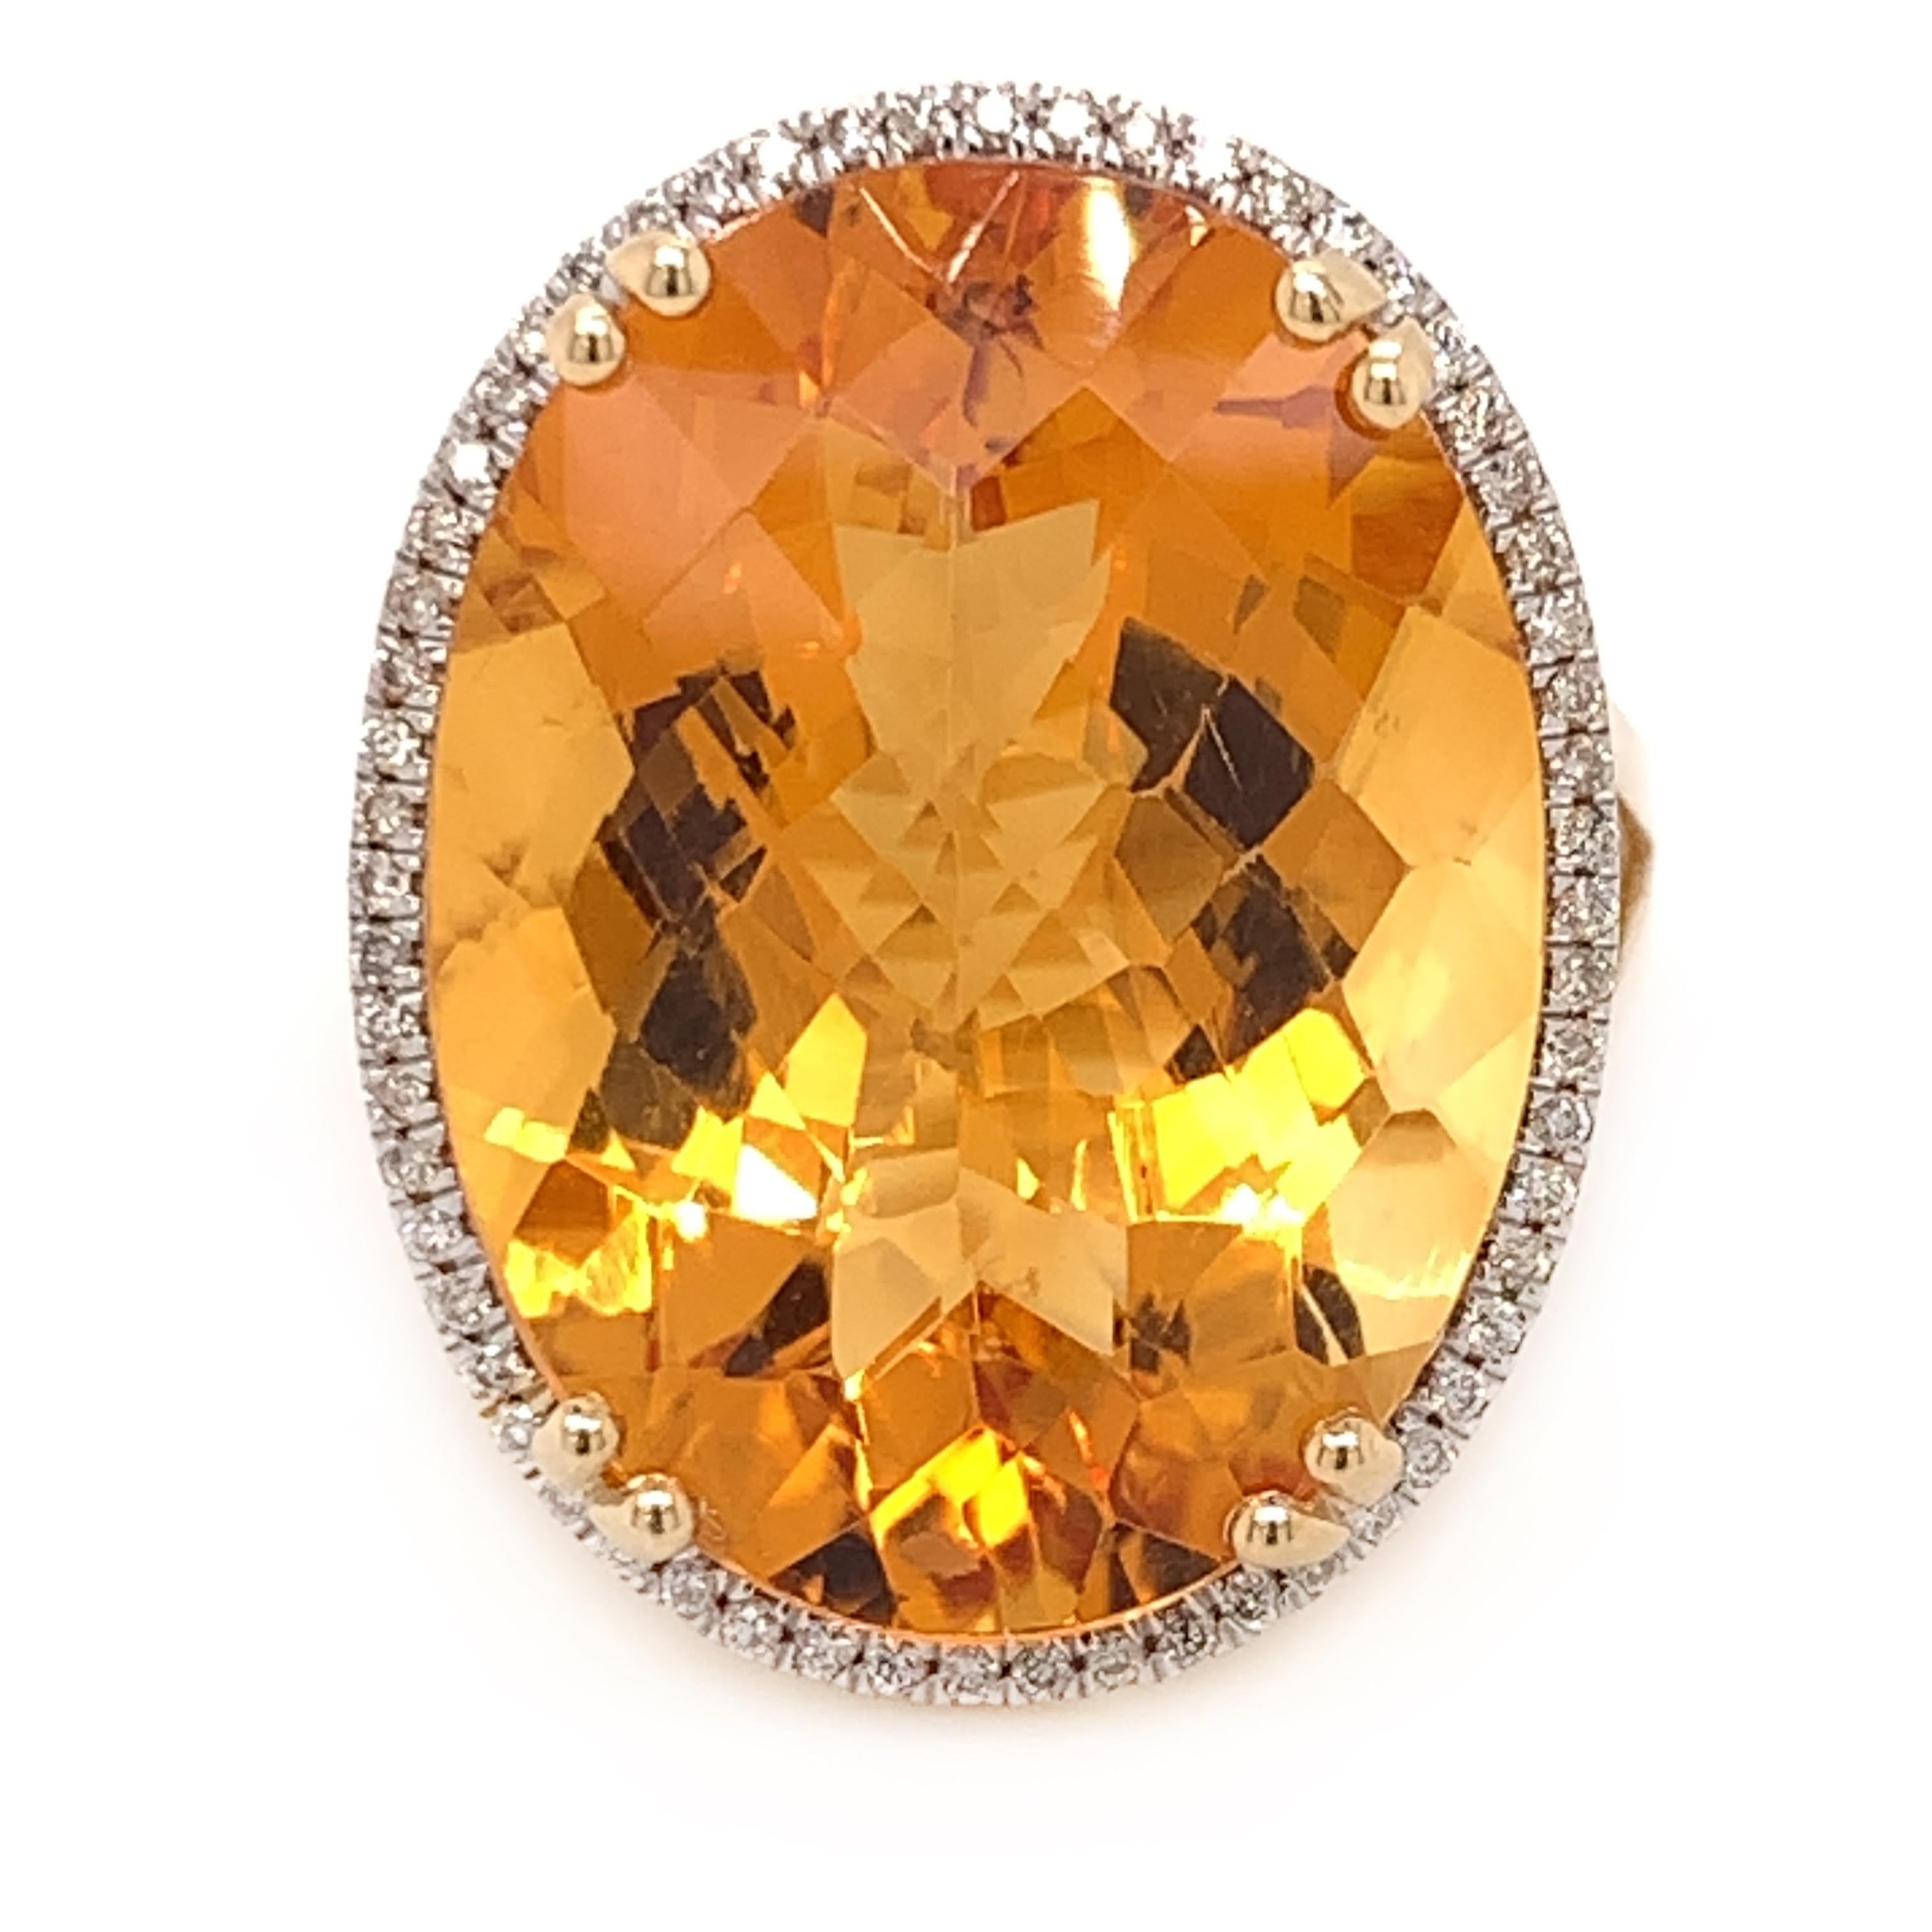 Oval Cut 15.45 Carat Citrine Cocktail Ring